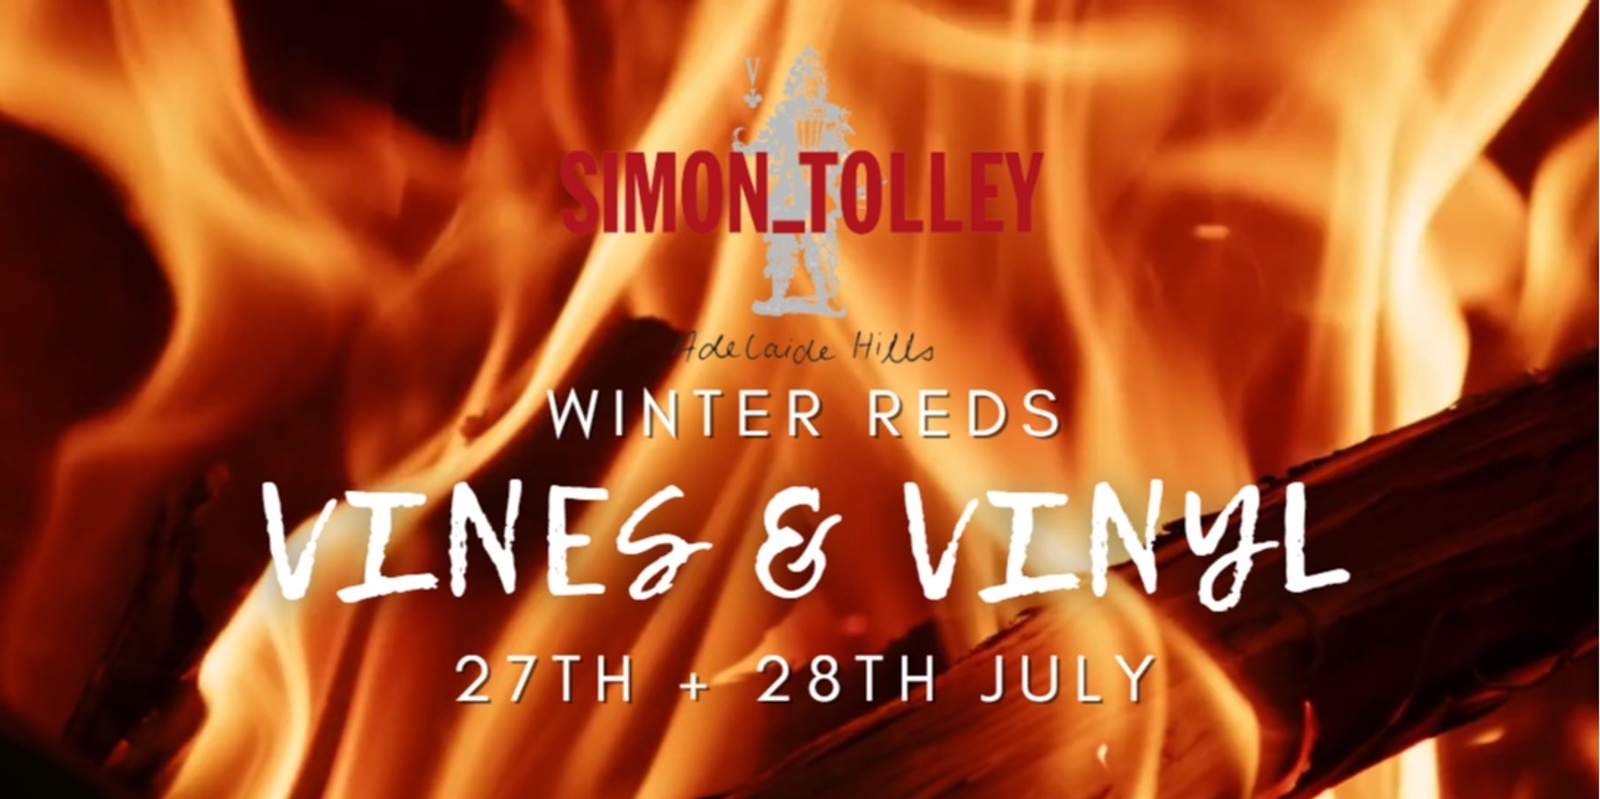 Banner image for Vines & Vinyl at Simon Tolley